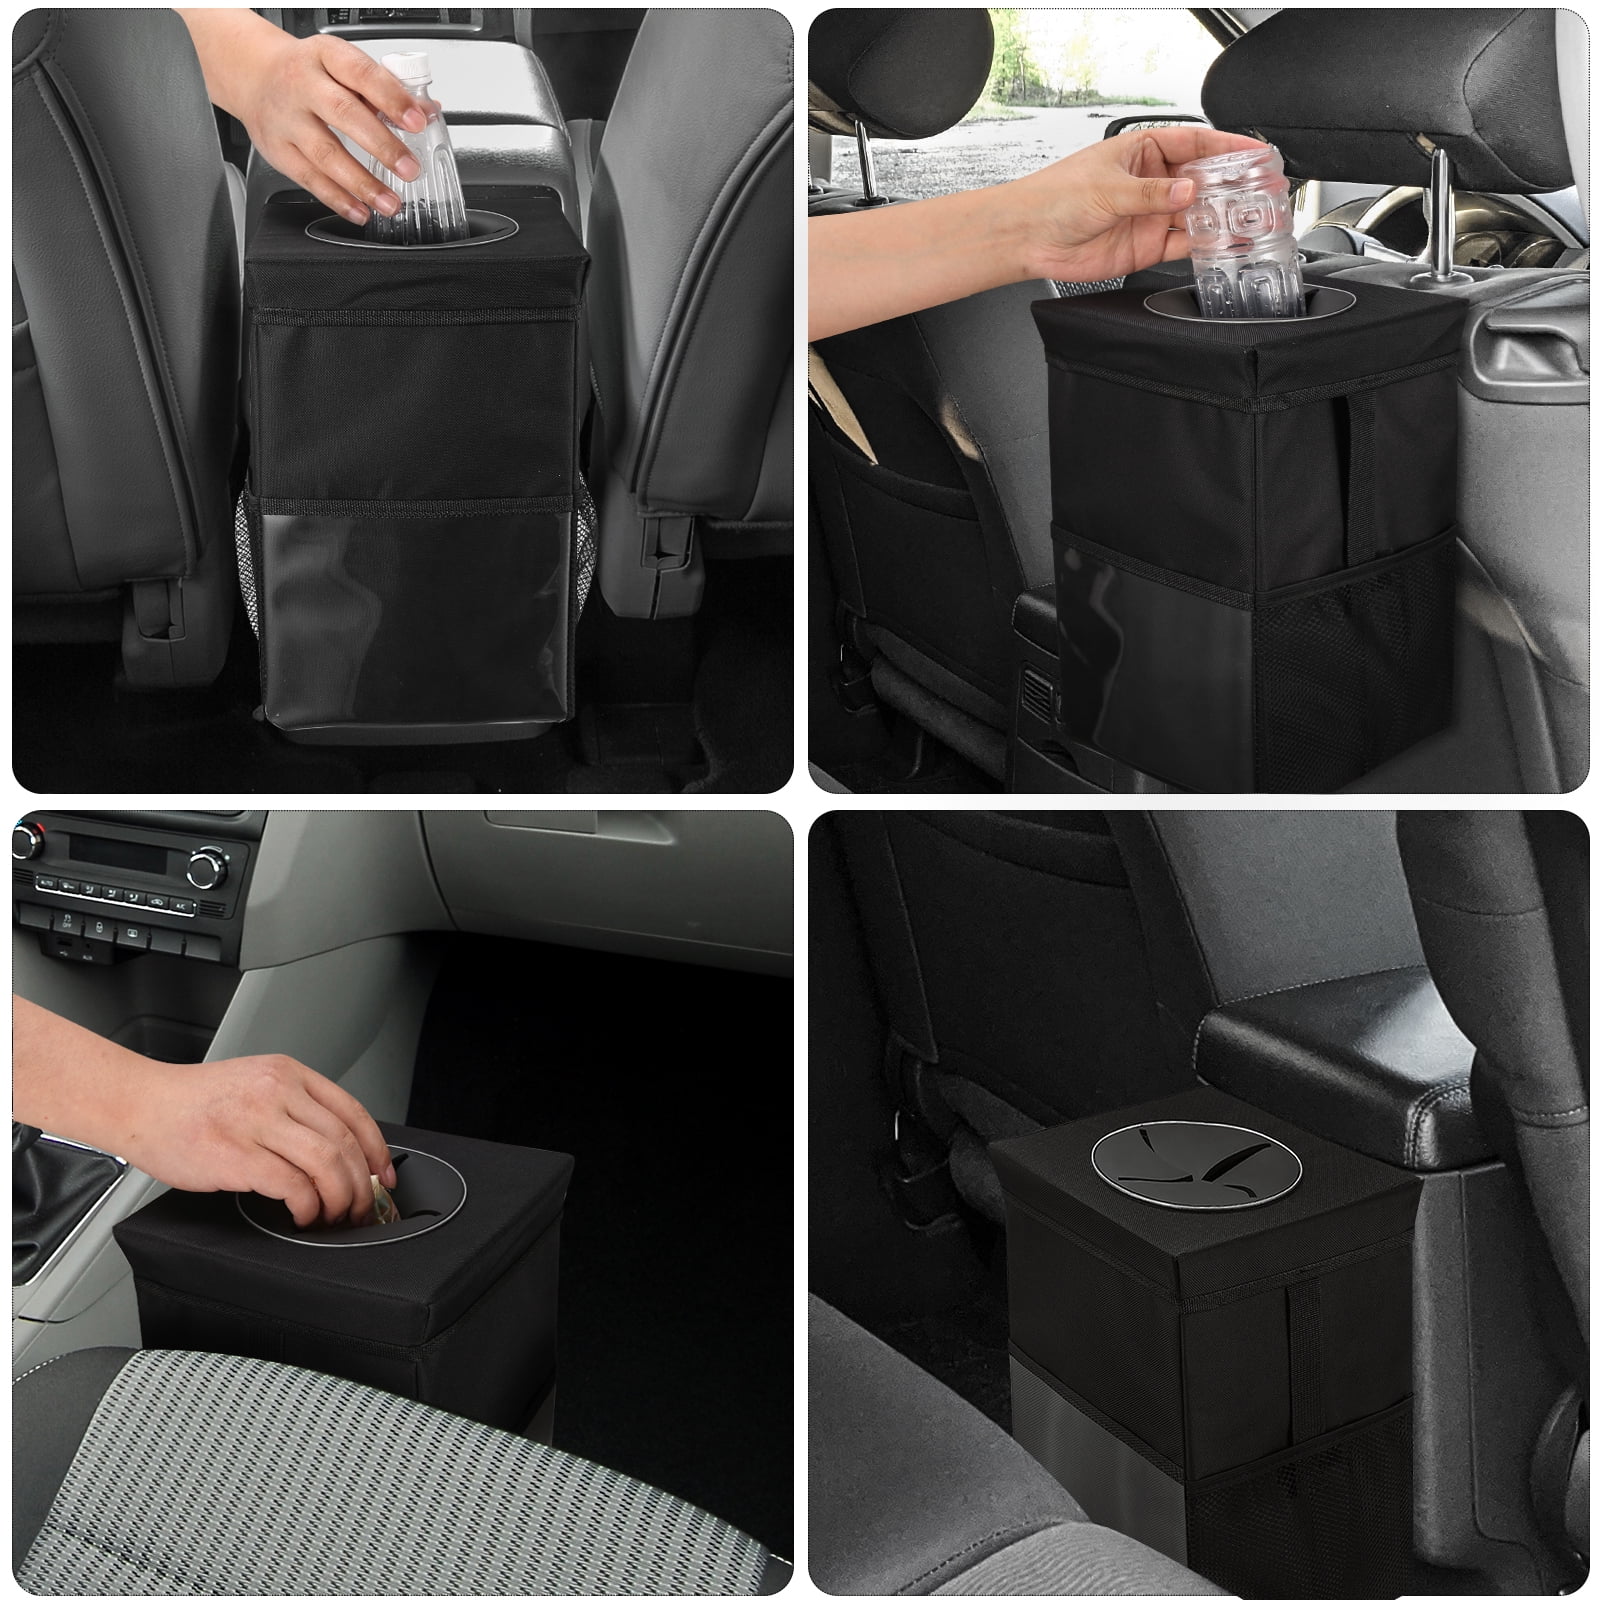 2.6 gal Car Trash Can with Lid Car Trash Bag Hanging with Storage Pockets Collapsible and Portable Car Garbage Bin 